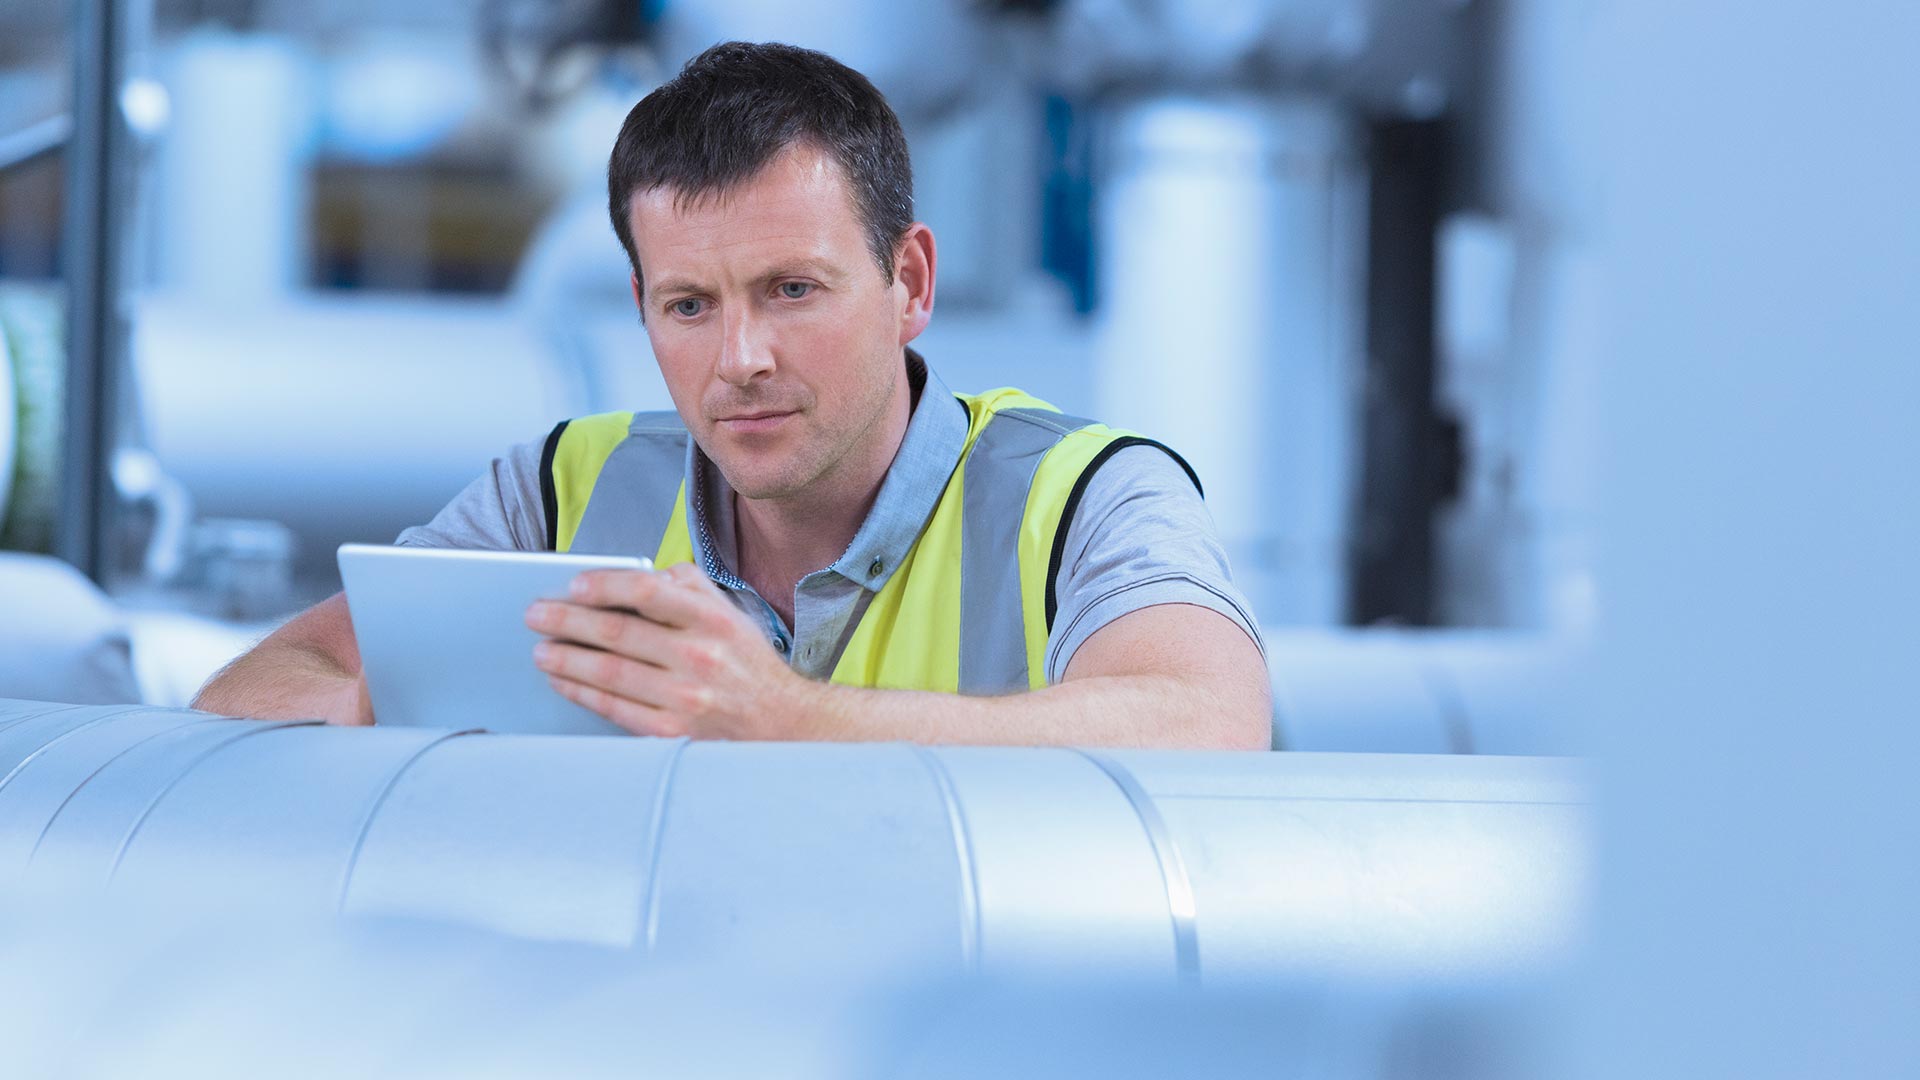 Man using tablet in an industrial environment